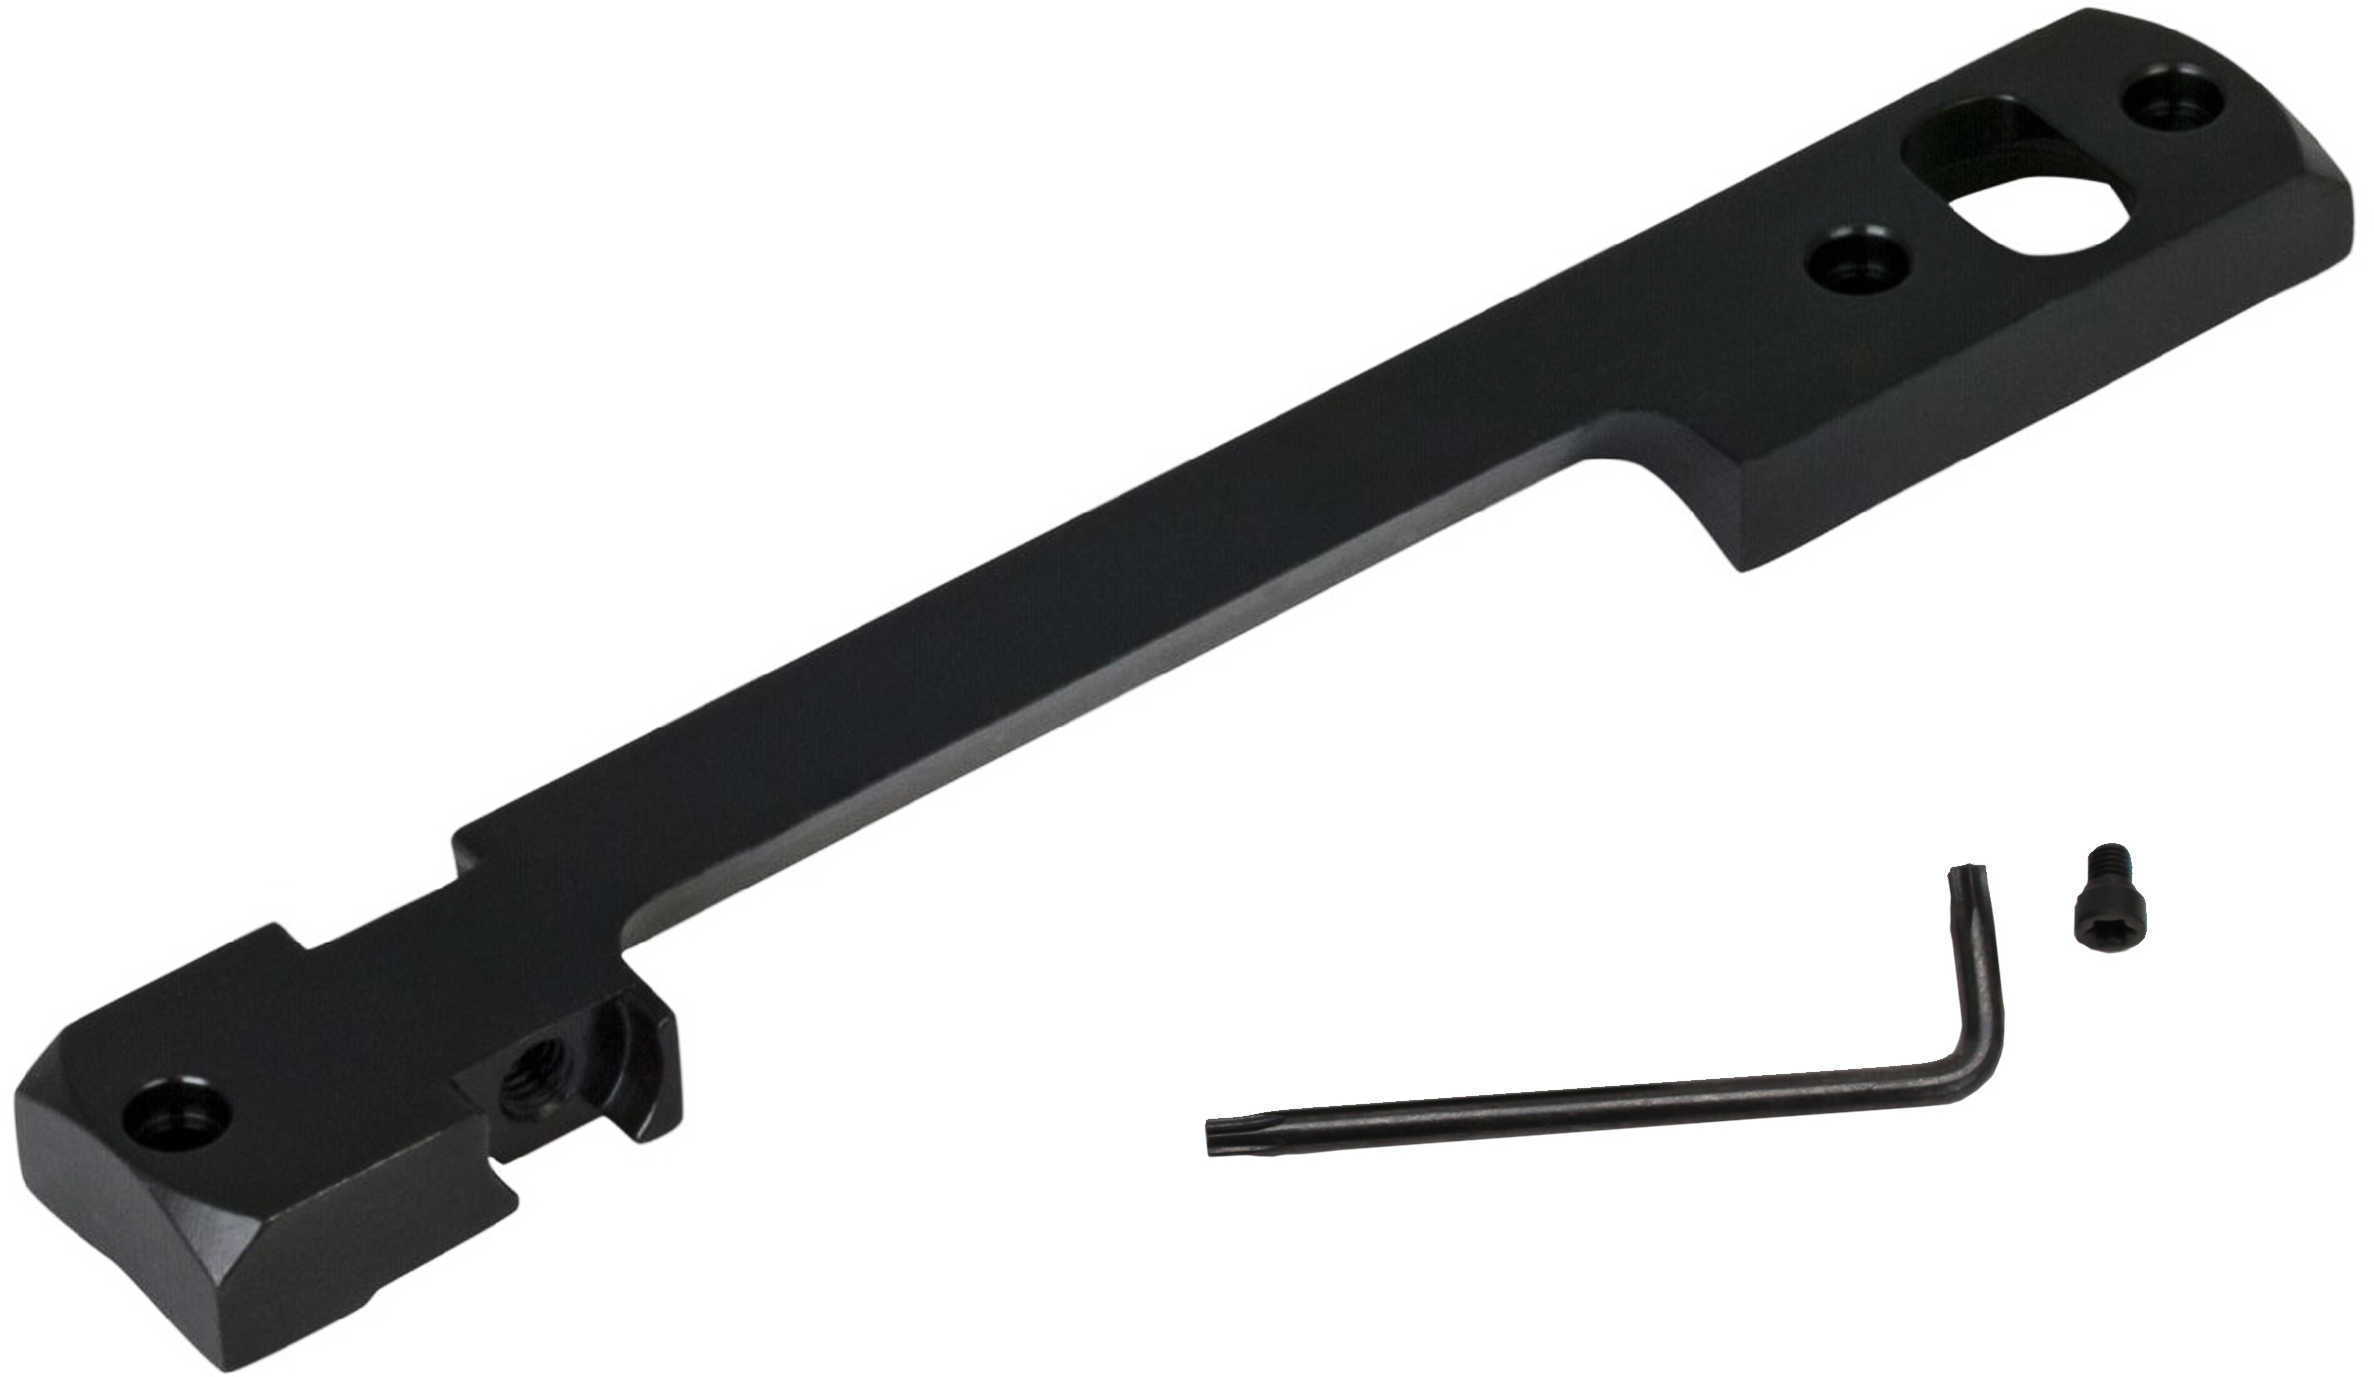 Leupold Std One-Piece Base Ruger® 10/22®, Matte Finish Machined Steel Construction - Front accepts Dovetail Ring - Rear